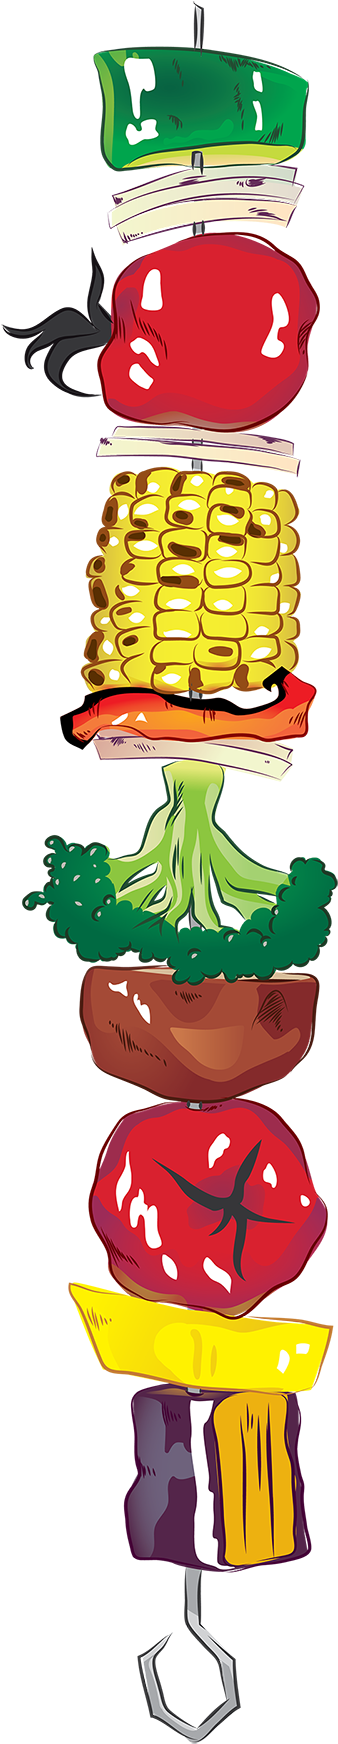 Veggie Kabob Illustrated For An Incentive Poster I - Veggie Kabob Illustrated For An Incentive Poster I (500x1780)